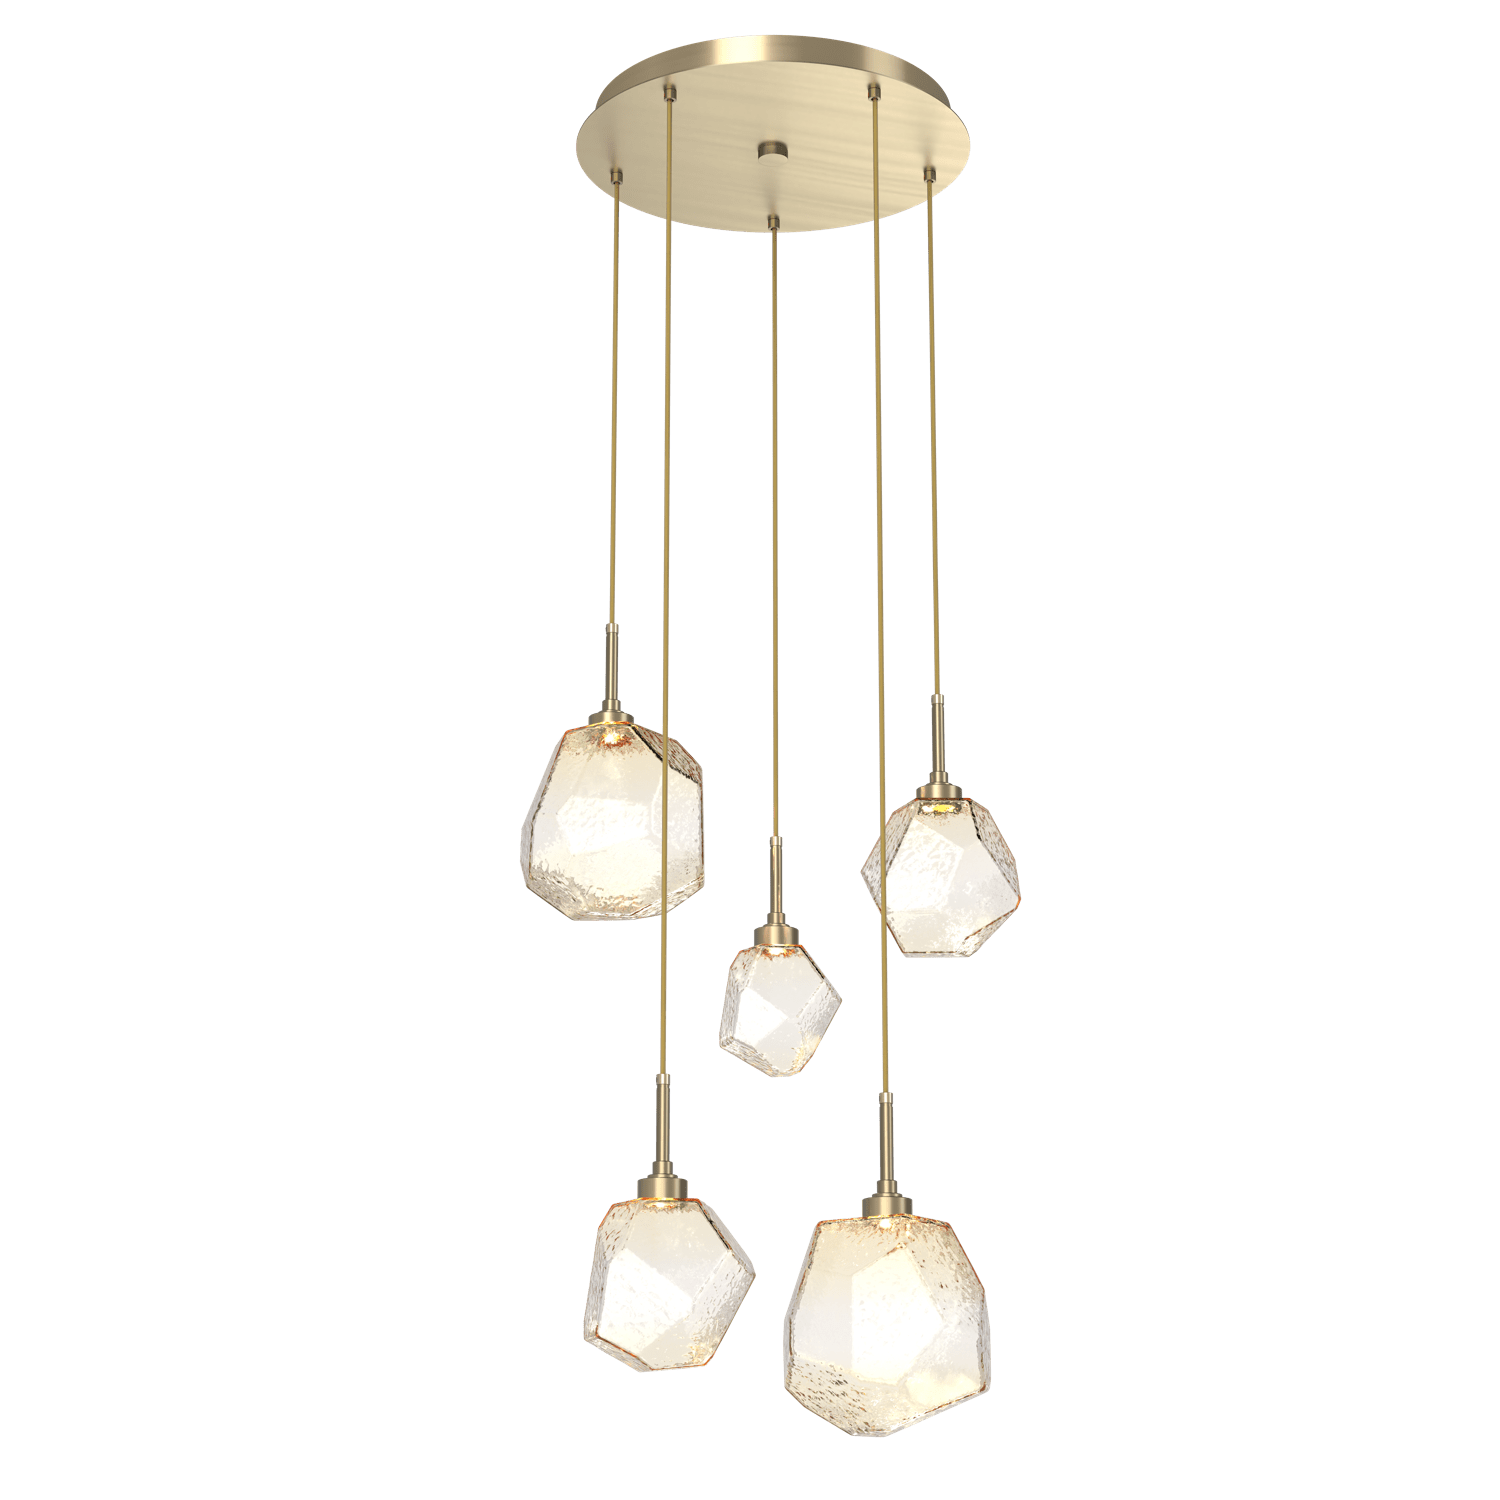 CHB0039-05-HB-A-Hammerton-Studio-Gem-5-light-round-pendant-chandelier-with-heritage-brass-finish-and-amber-blown-glass-shades-and-LED-lamping